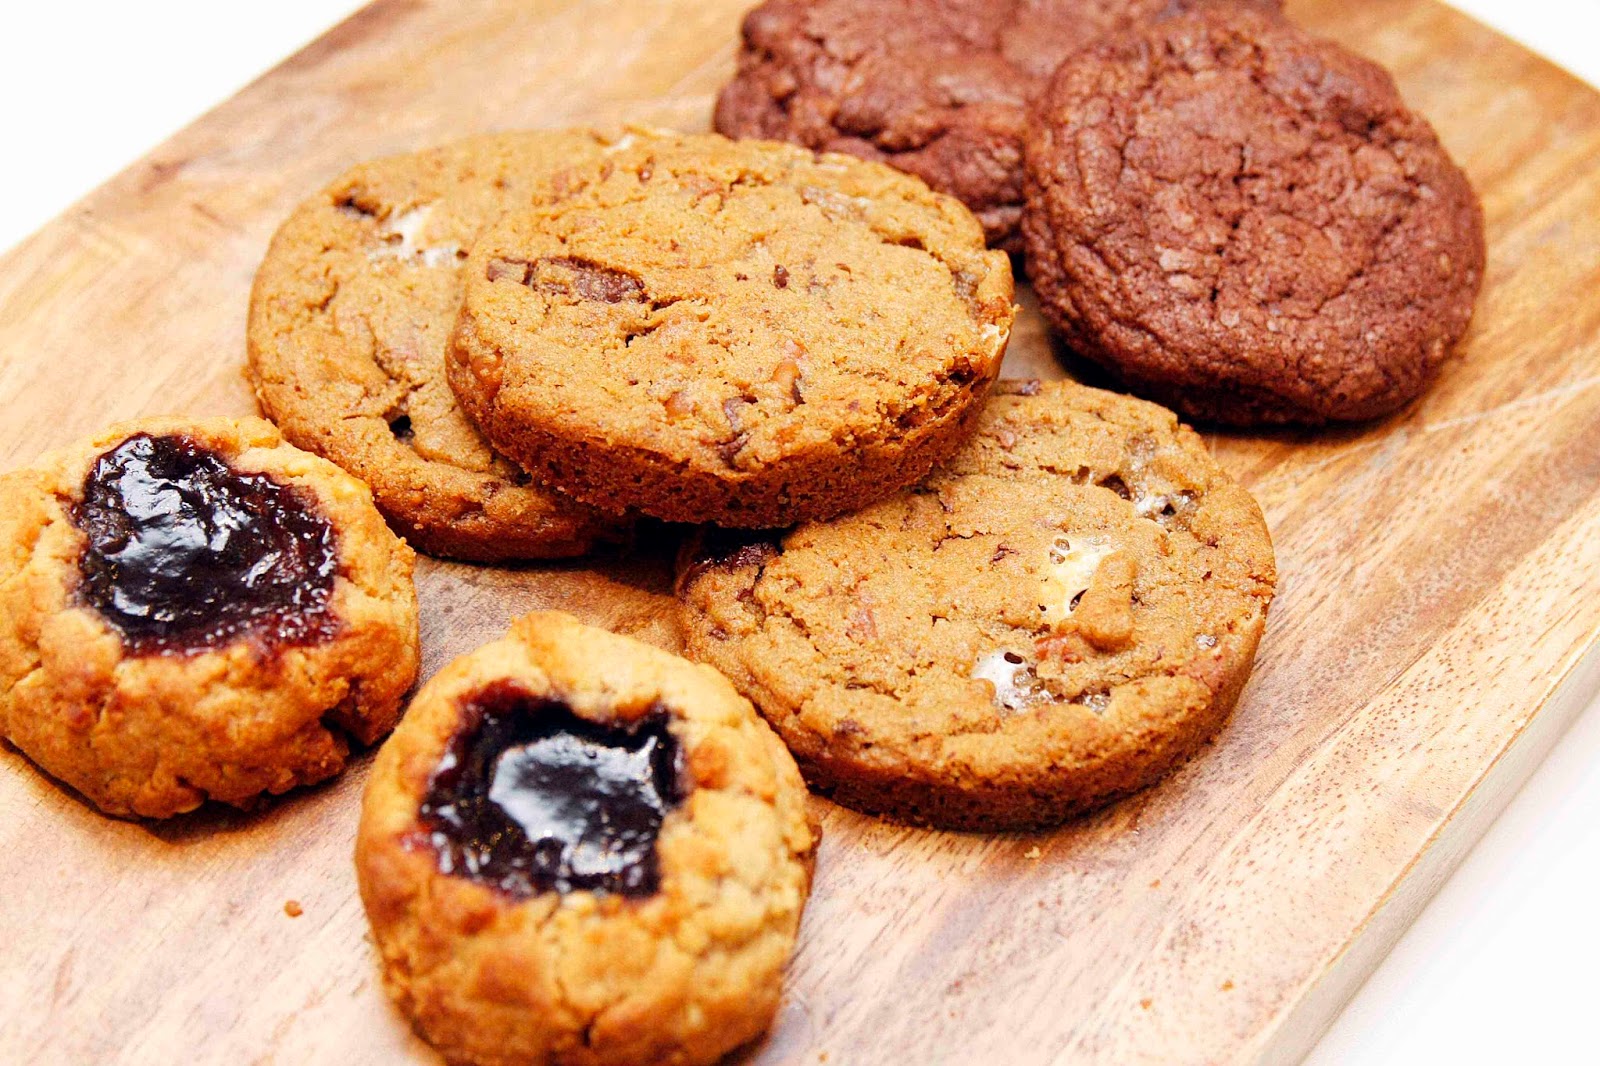 ALL THINGS GOOD cookies, Peanut Butter and Jelly, Chocolate Truffle Cookies